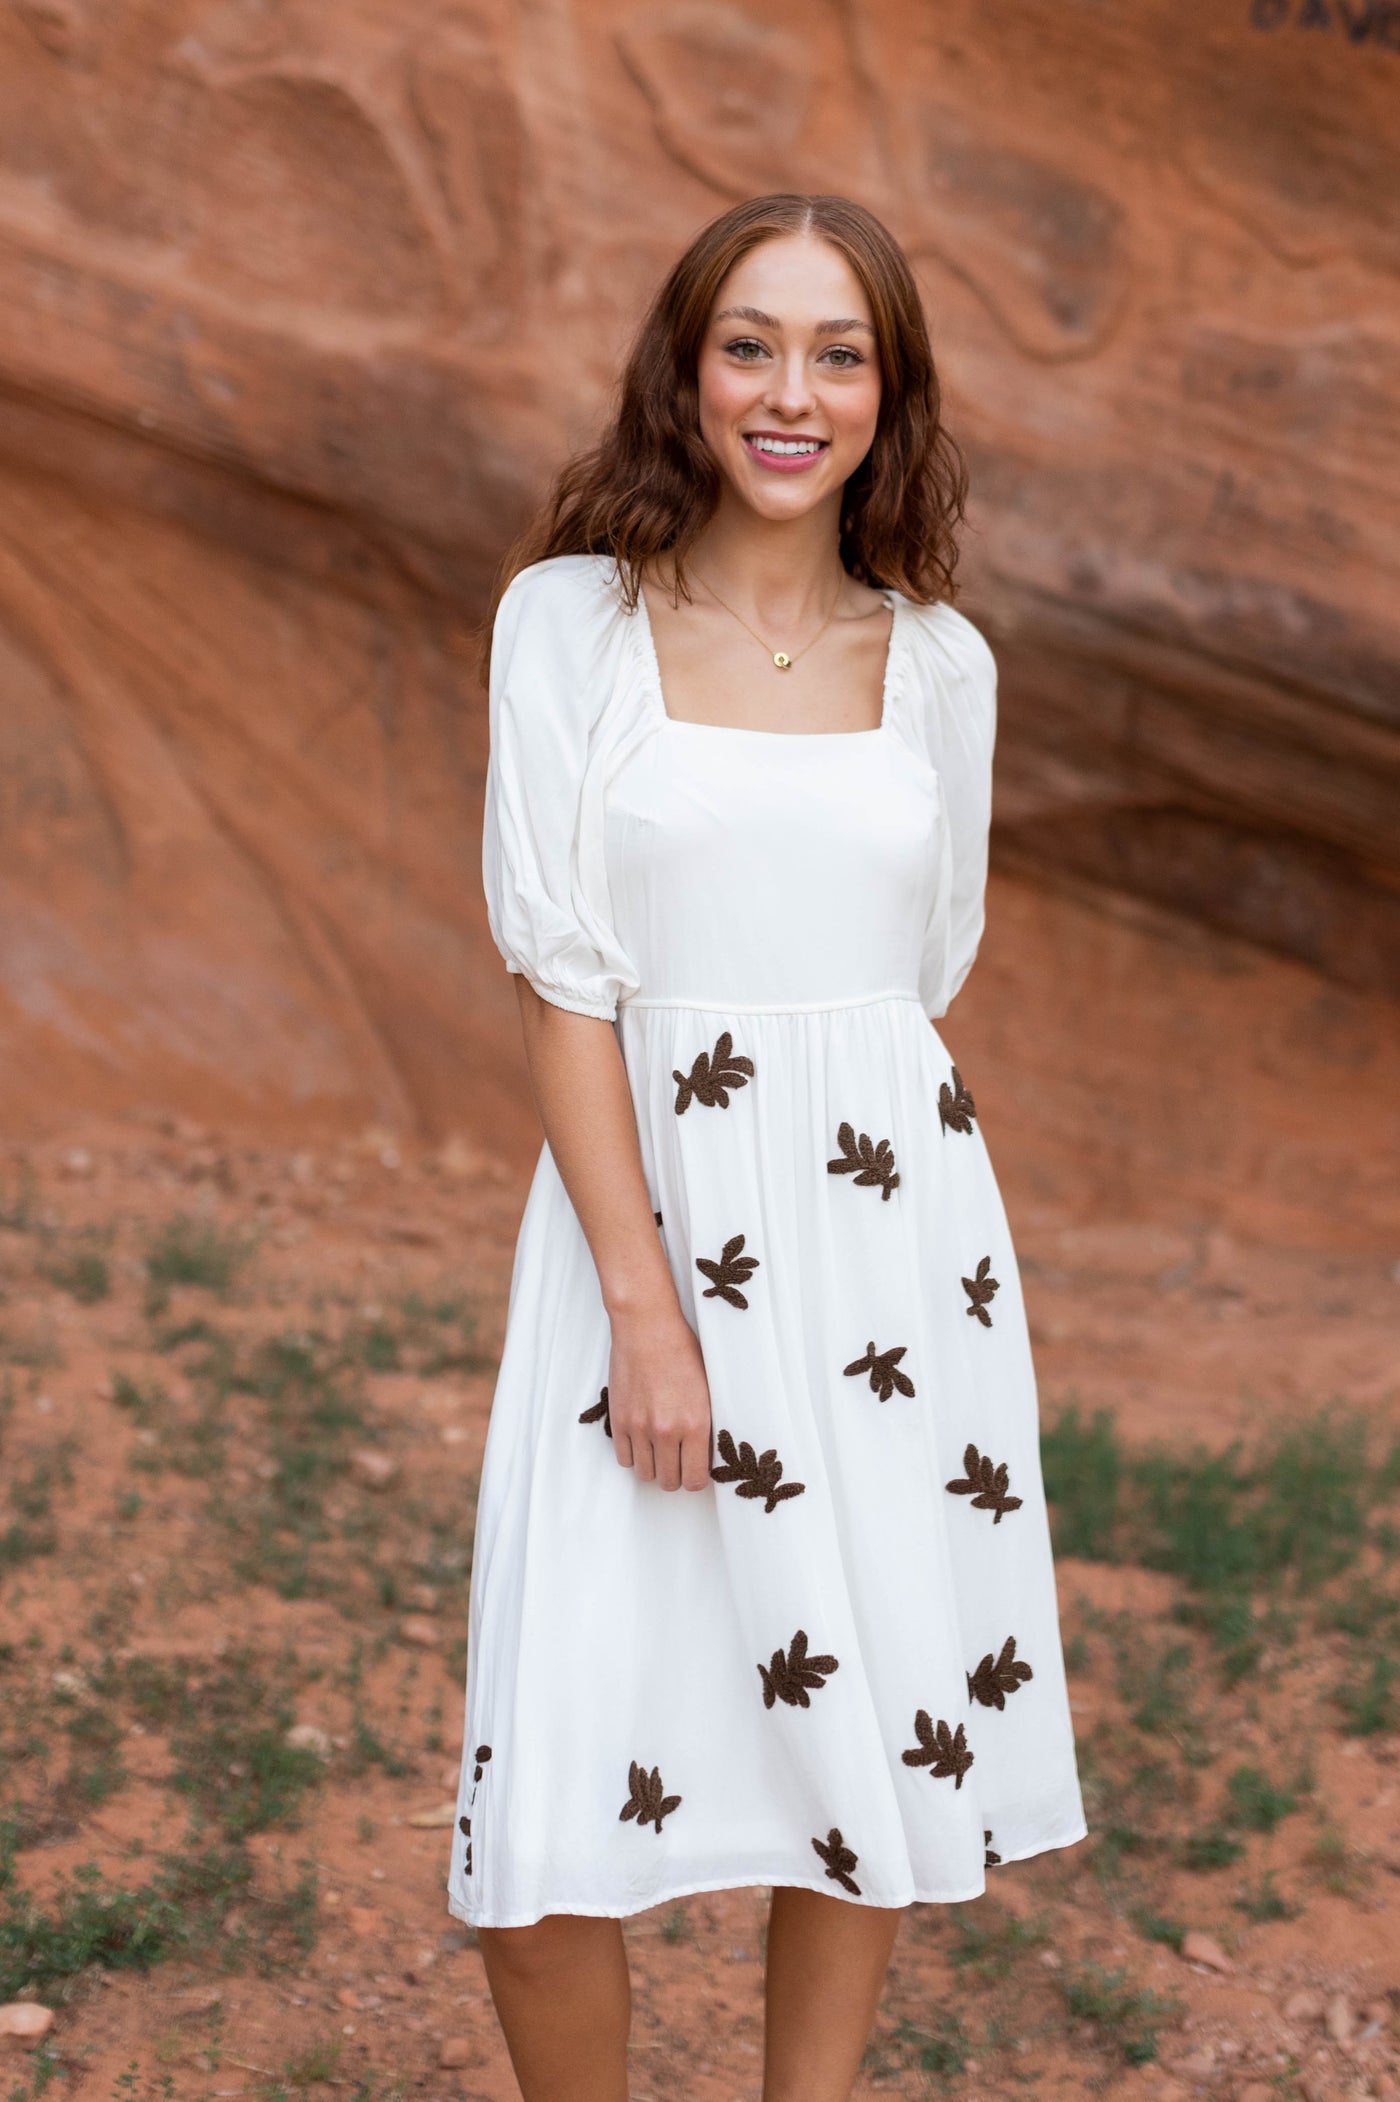 Short sleeve ivory dress with leaf pattern on the skirt